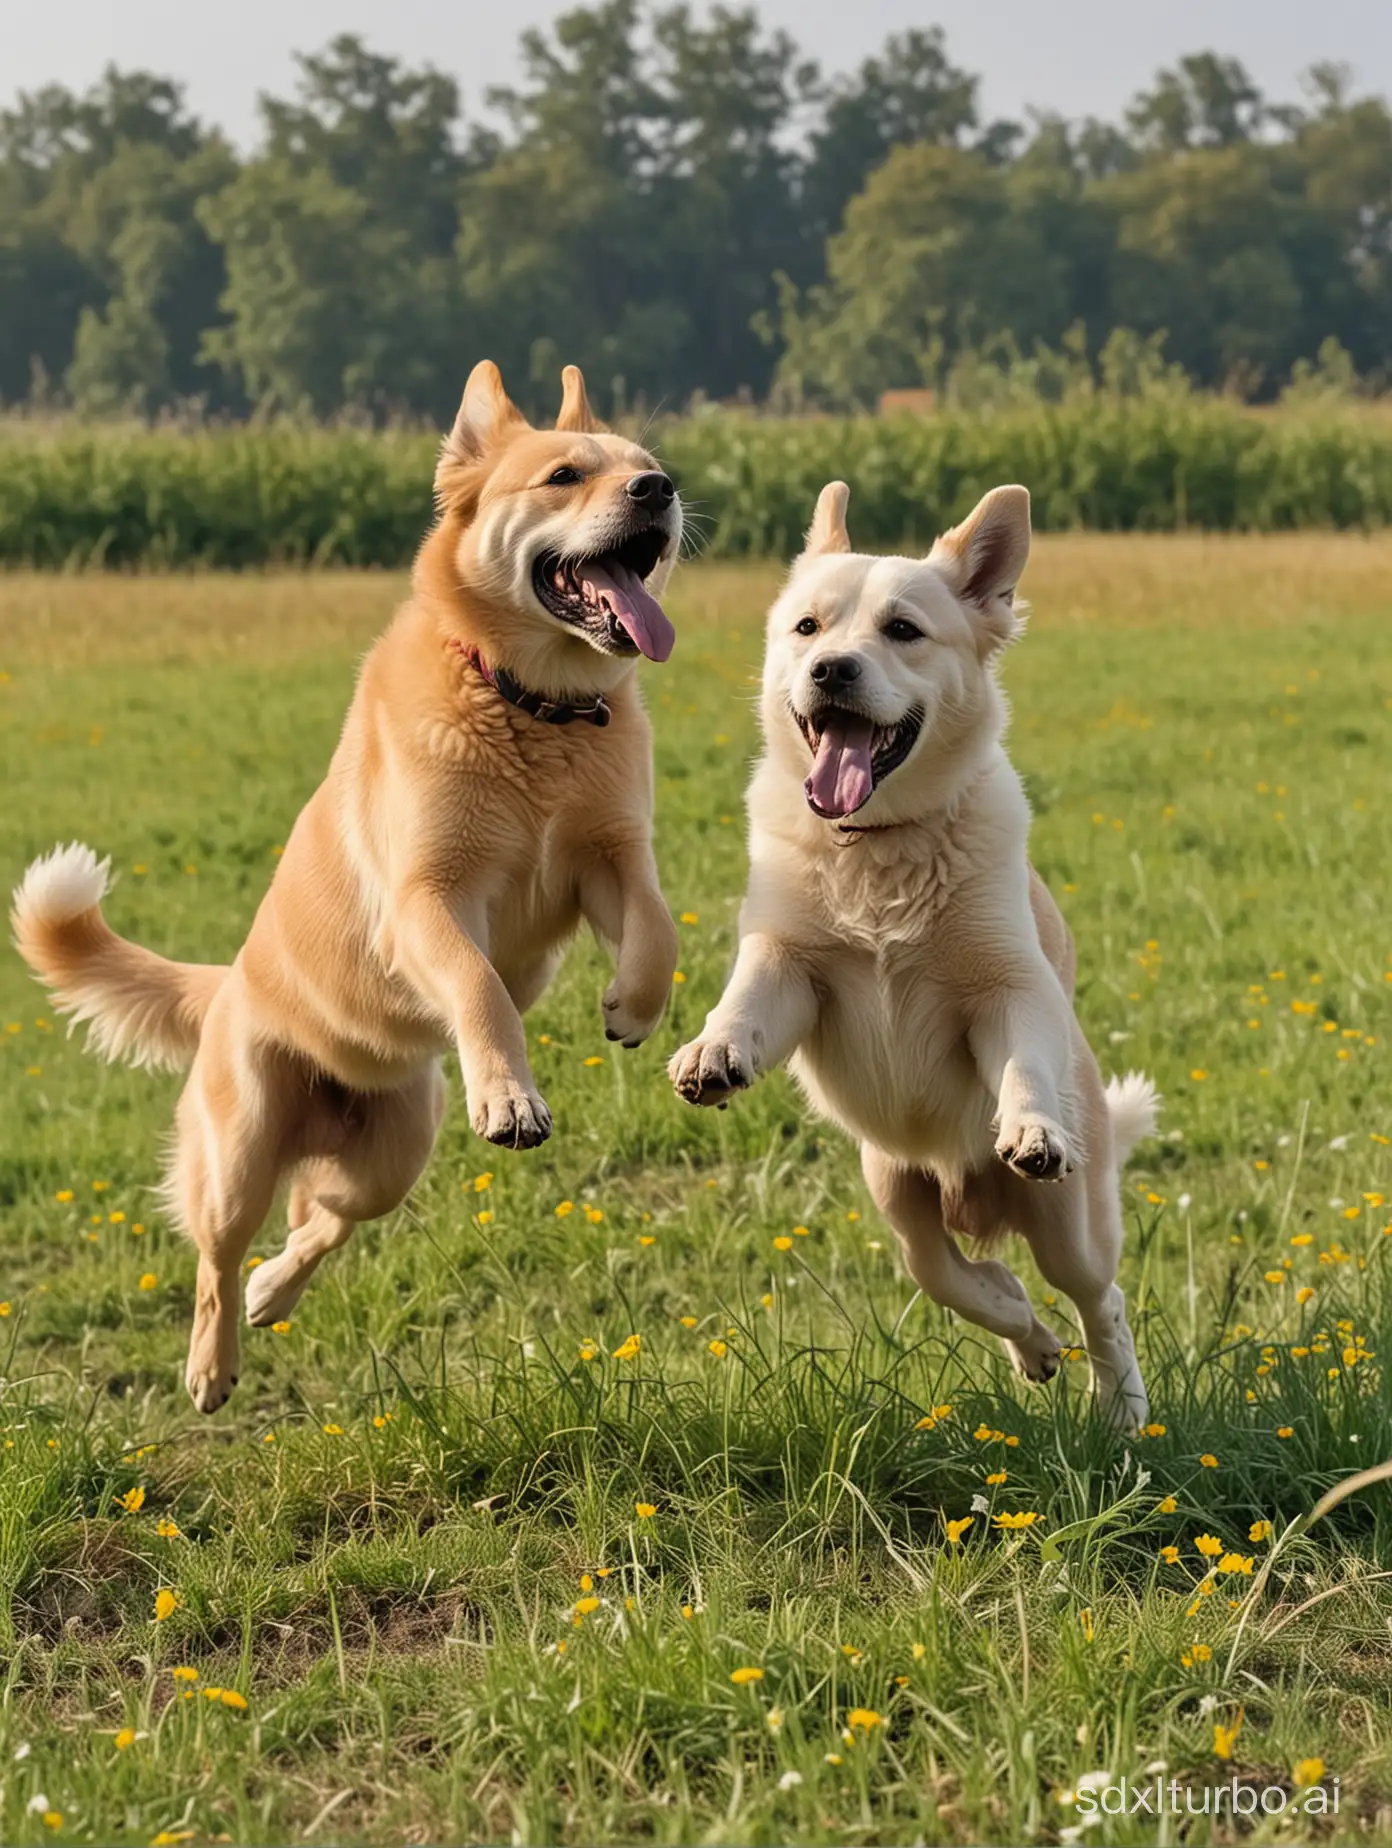 Playful-Dogs-Frolicking-in-Fields